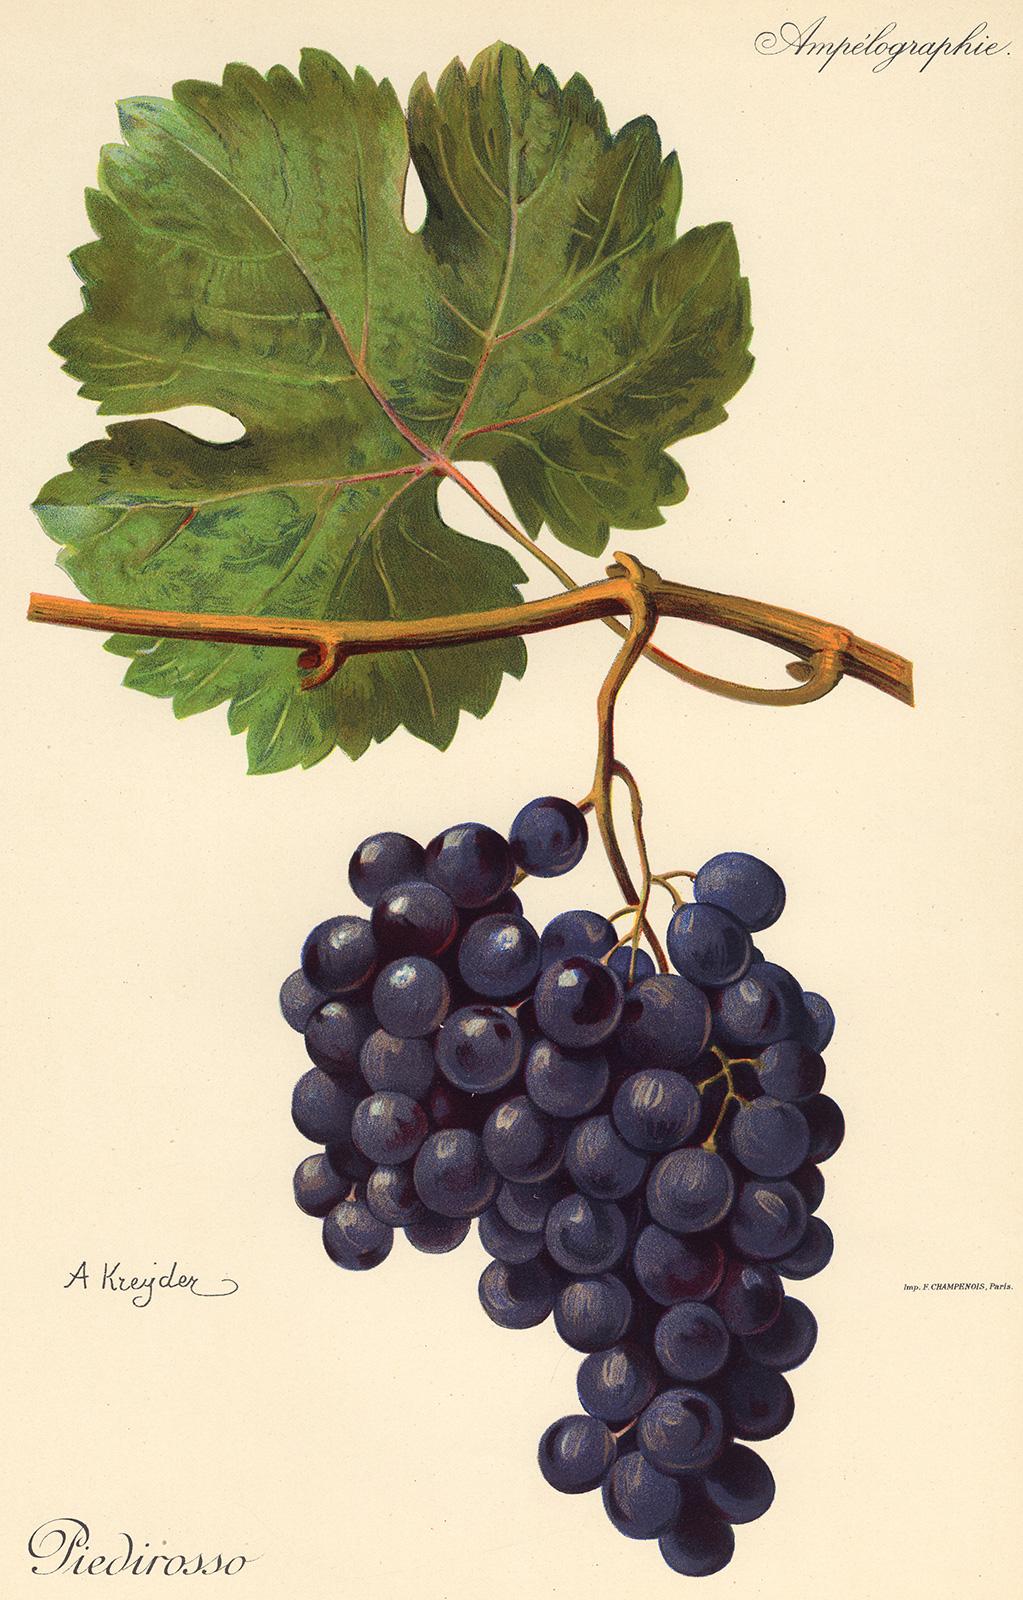 Victor Vermorel Print - The Piedirosso grape - from Ampelography by Vermorel - Lithograph - Early 20th c